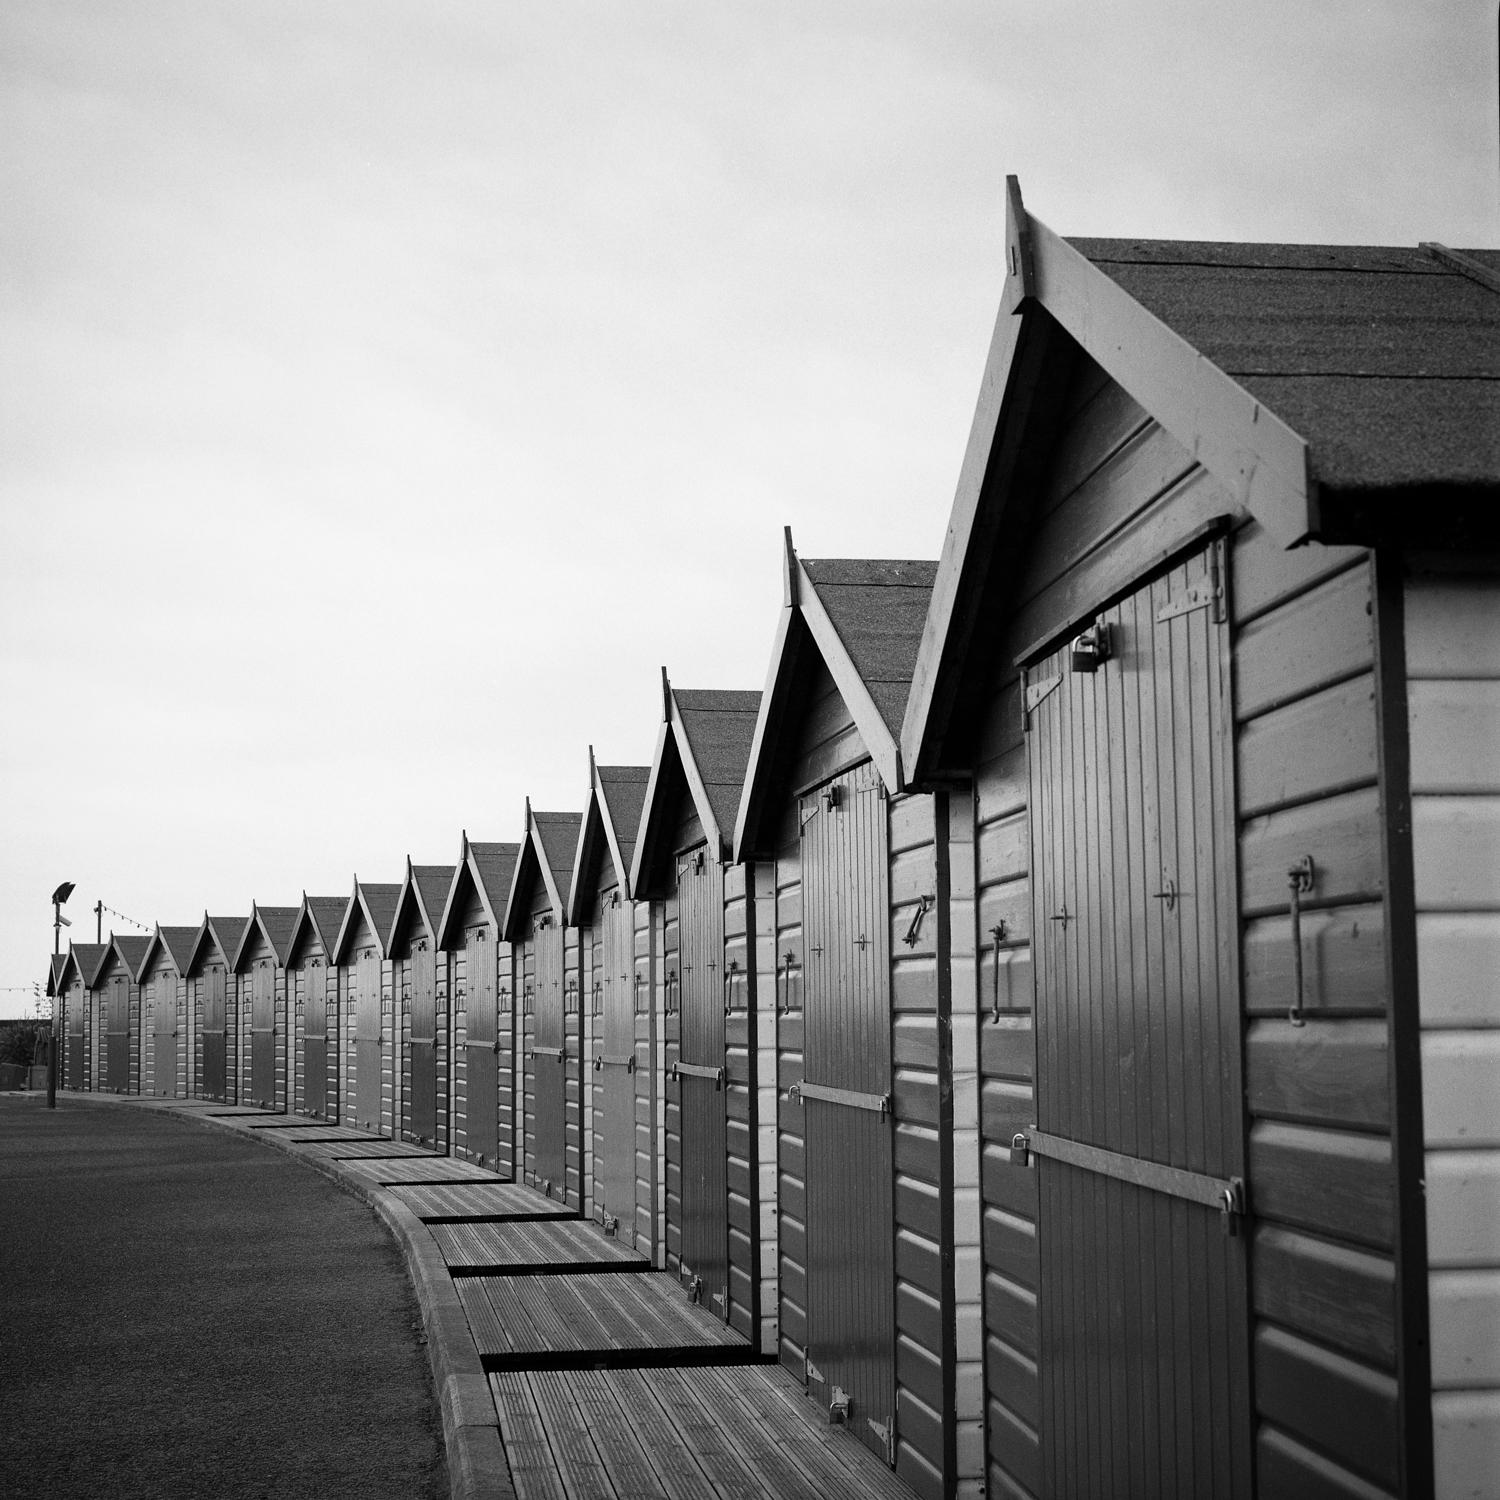 [Featured in Italian Vogue. The print will not display the watermark]

Edition 1/10 - Beach Huts II, Dawlish Warren, Devon, Silver Gelatin Photograph

Edition of 10 + 5 APs.
Front: Signature and edition number with artists blind stamp.  
Back: Ink